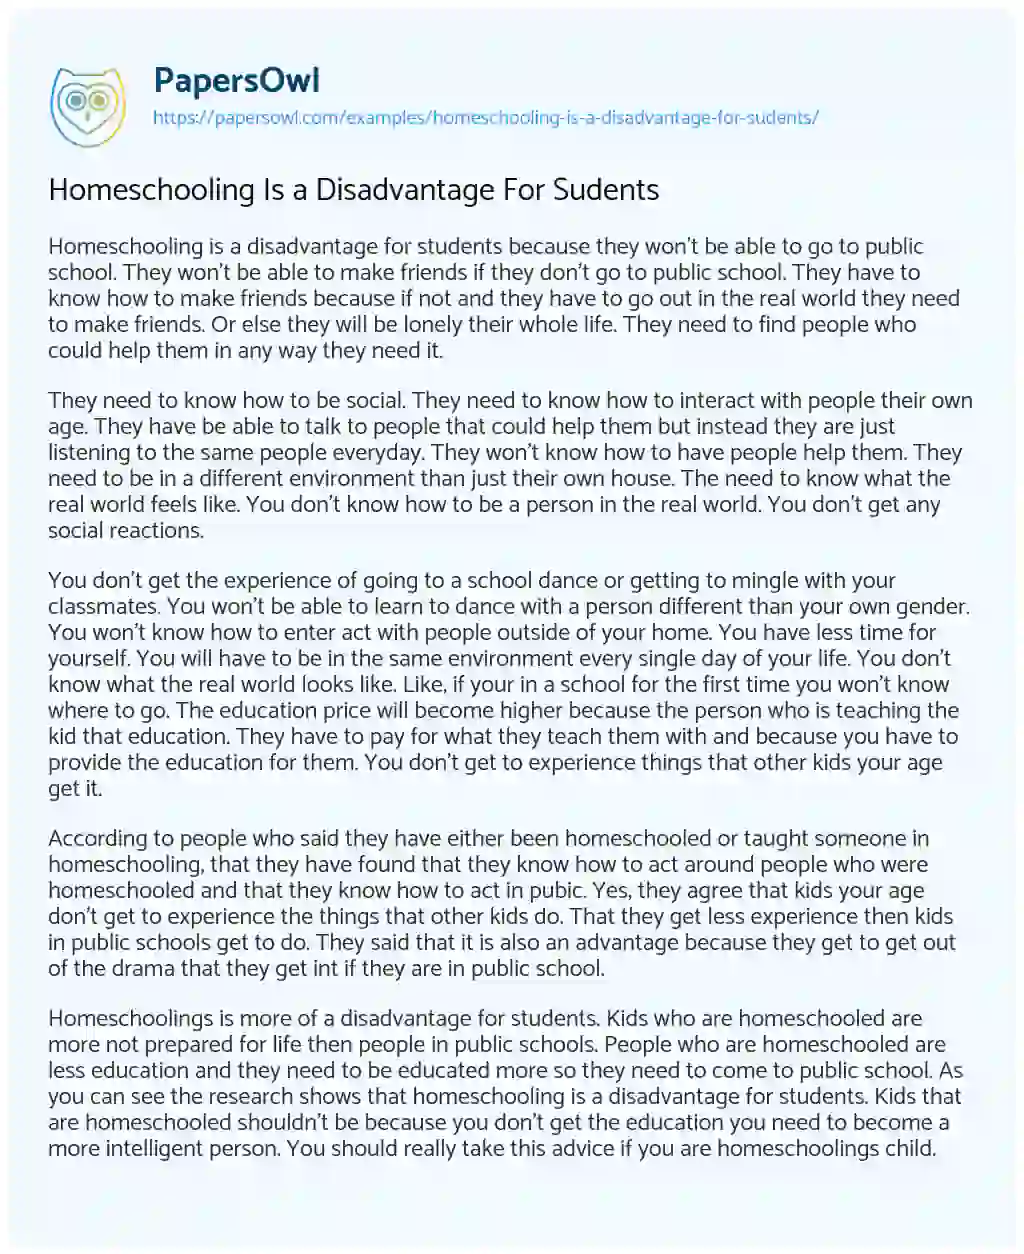 Homeschooling is a Disadvantage for Sudents essay